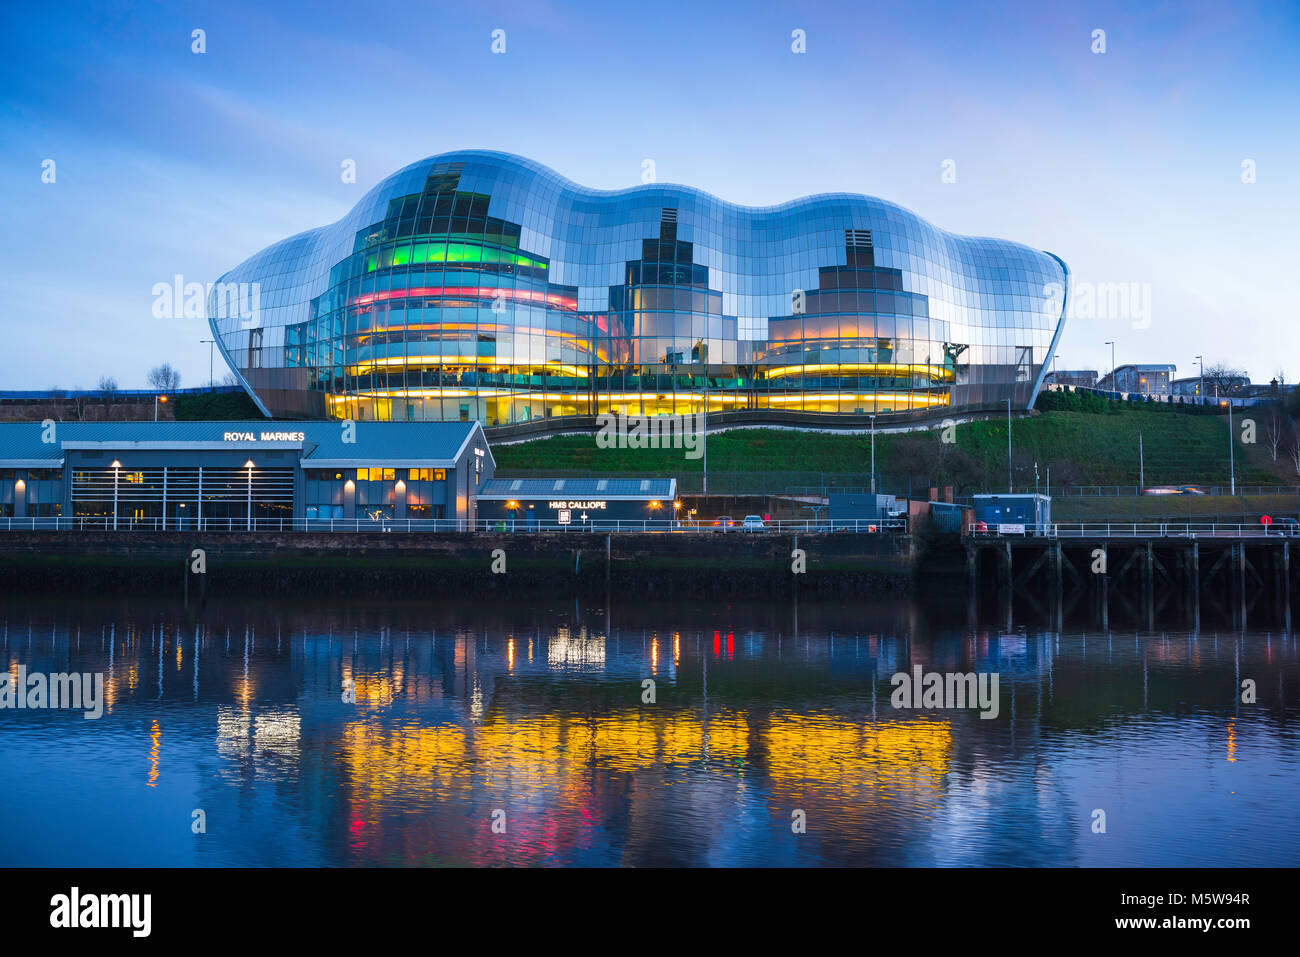 Sage Gateshead building, view at dusk of the Sage Gateshead building along the River Tyne in the centre of Newcastle, Tyne And Wear, England, UK Stock Photo